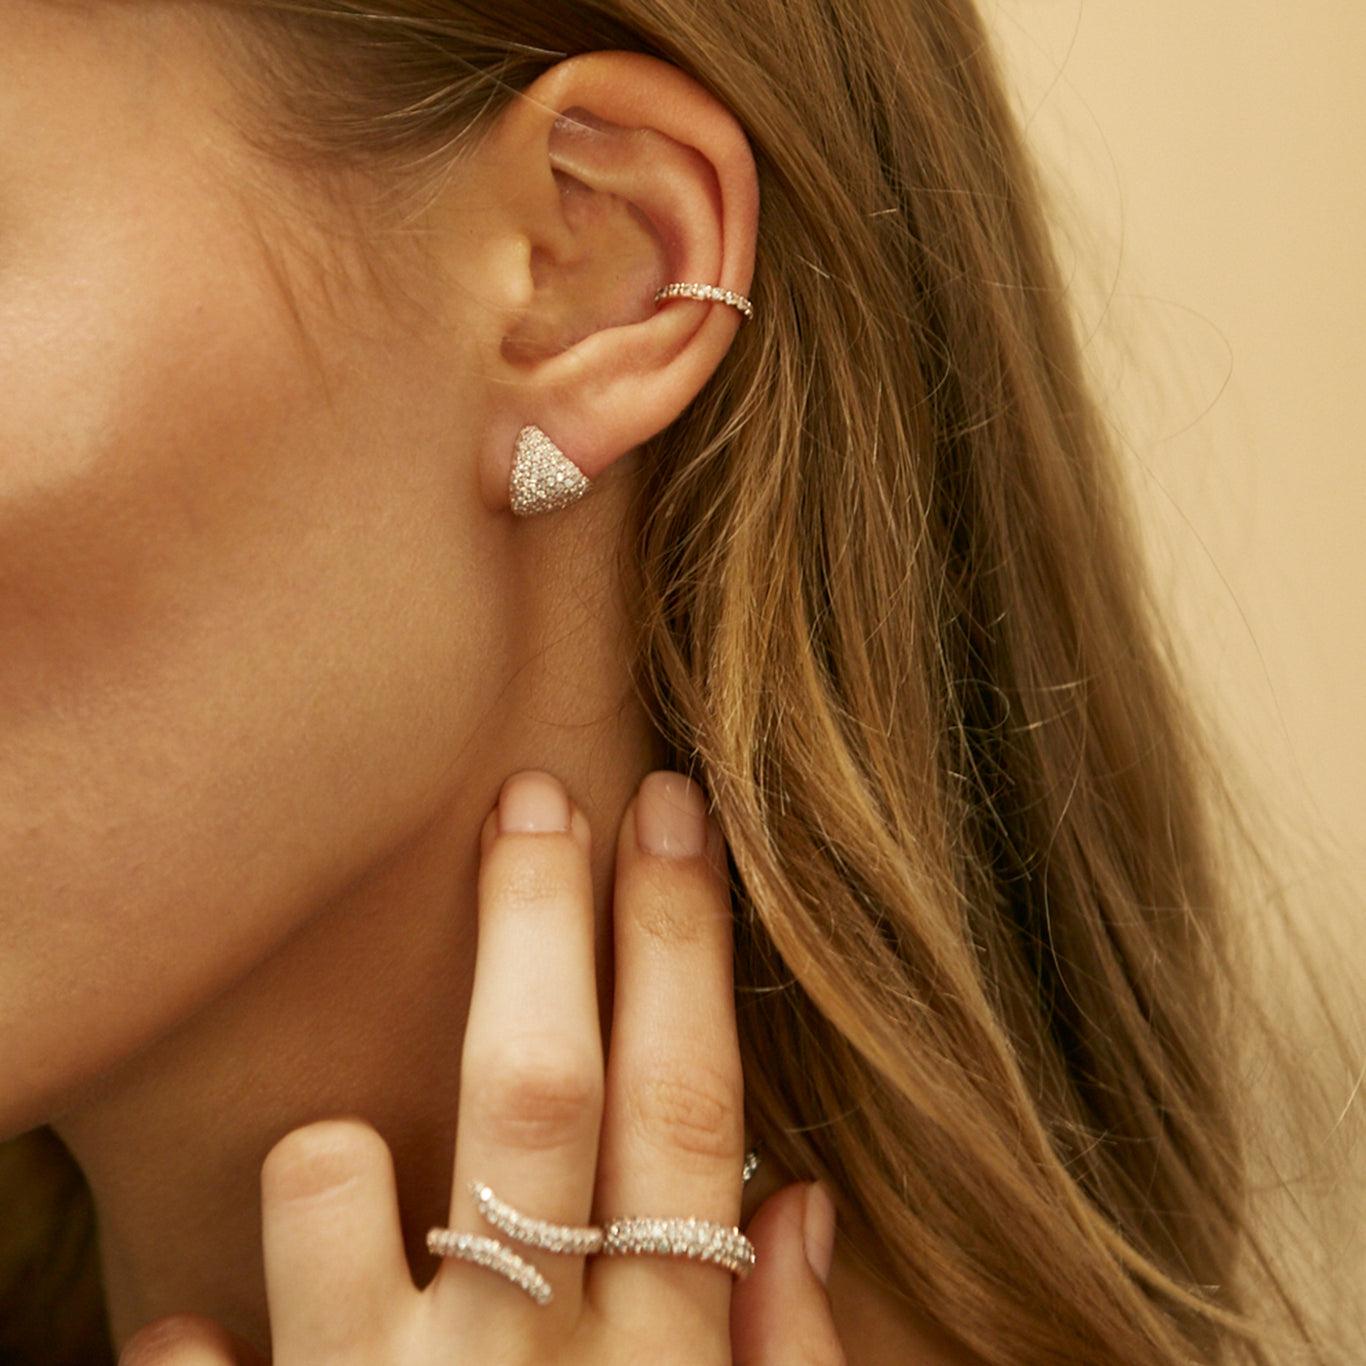 The Diamond Earring Cup shown with the Classic Cuff. Additionally, the model is wearing our Viper Ring and Dome Band on the hand.